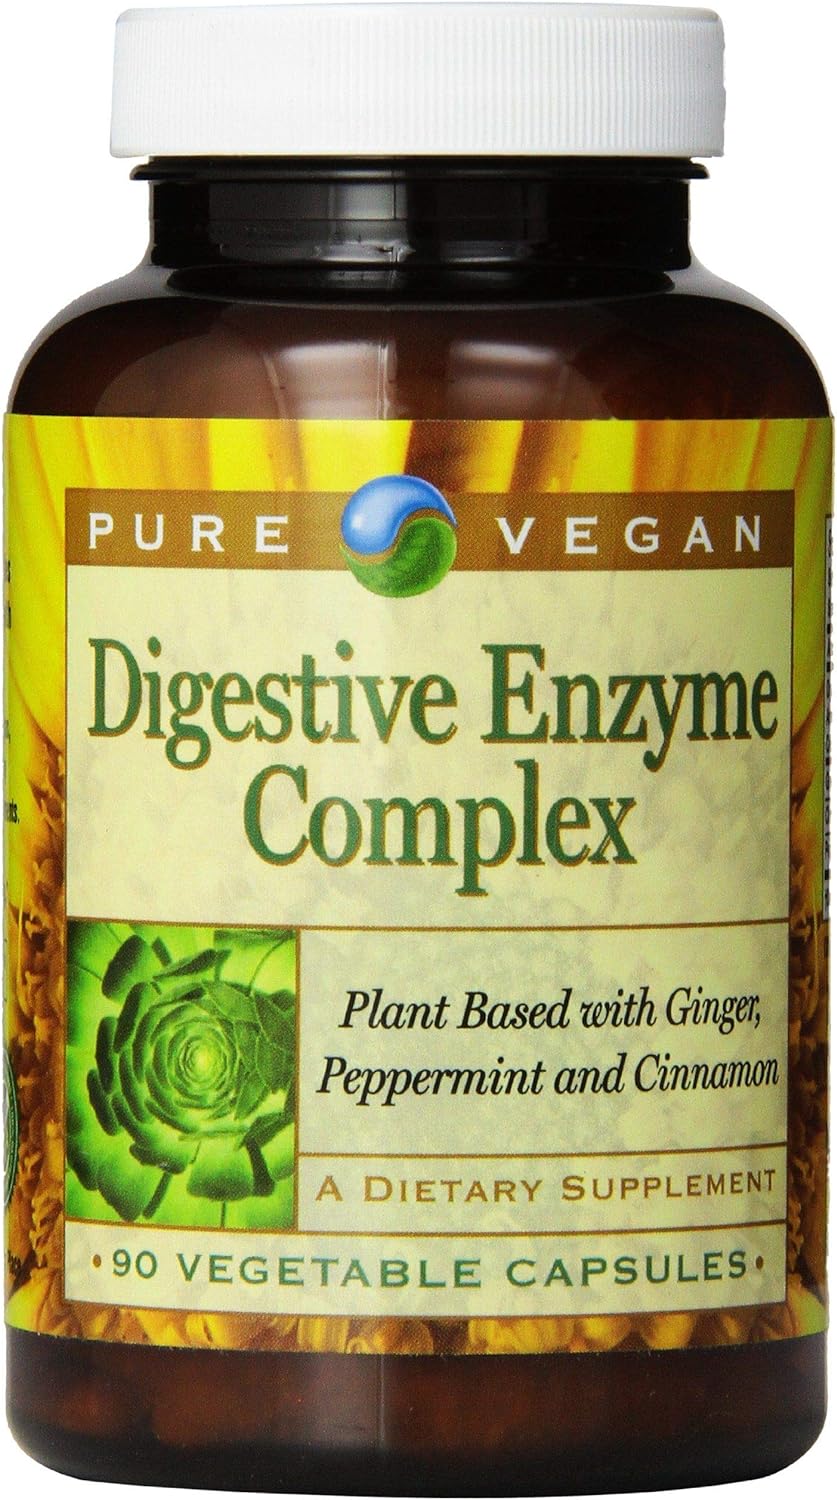 nbpure Digestive Enzyme Complex Vegetarian Capsules, 90 Count0.35 Ounces